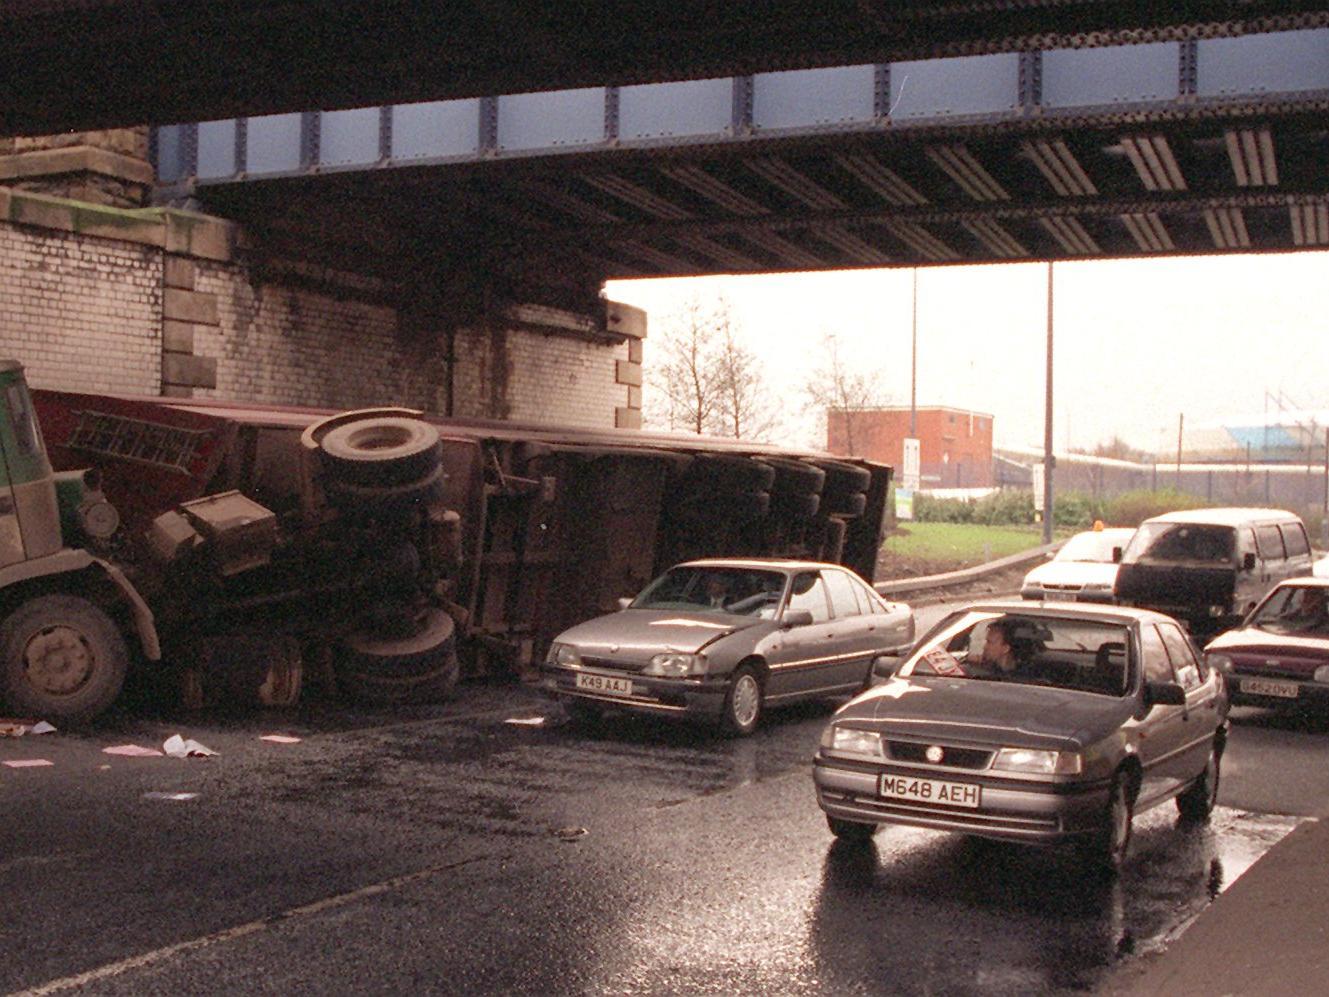 Leeds was brought to a standstill afetr this lorry overturned near Armley Gyratory.